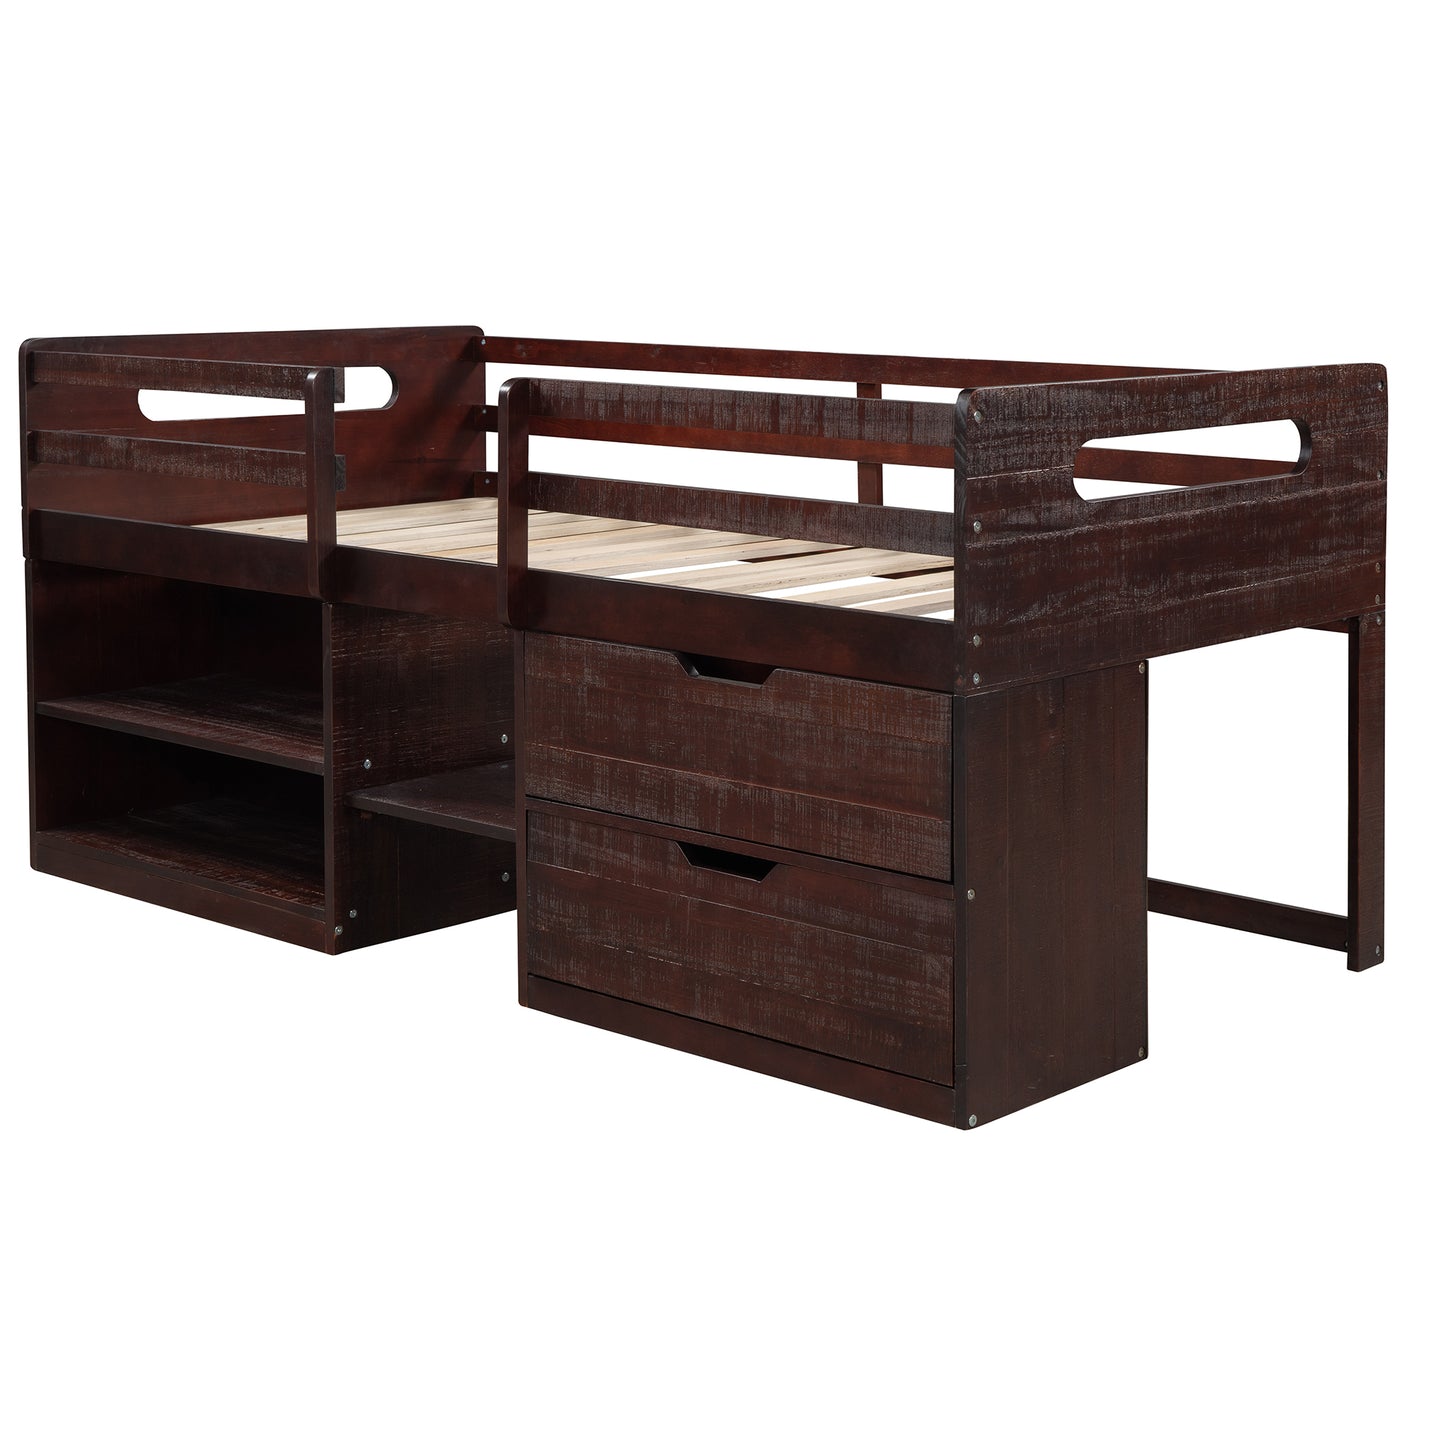 Twin size Loft Bed with Two Shelves and Two drawers Antique Espresso